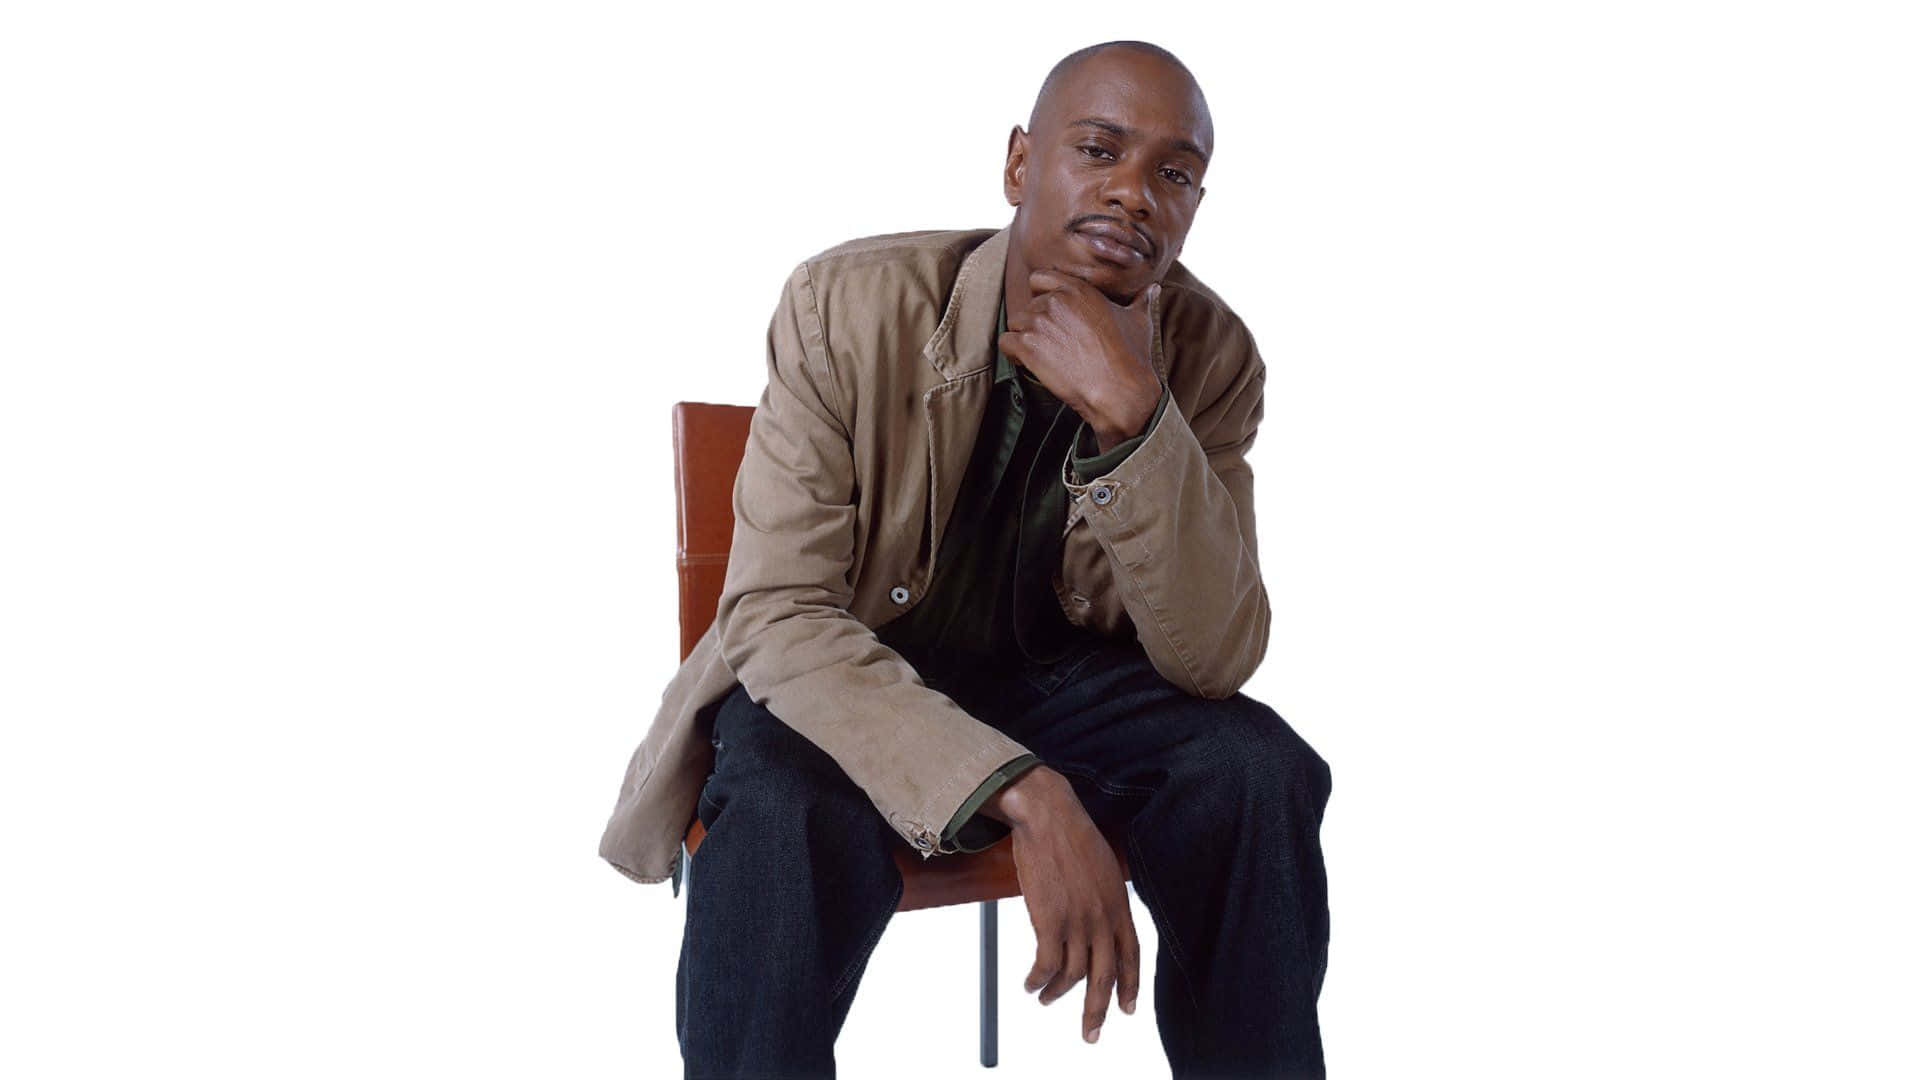 Dave Chappelle Onstage Delivering An Impactful Comedy Performance Background